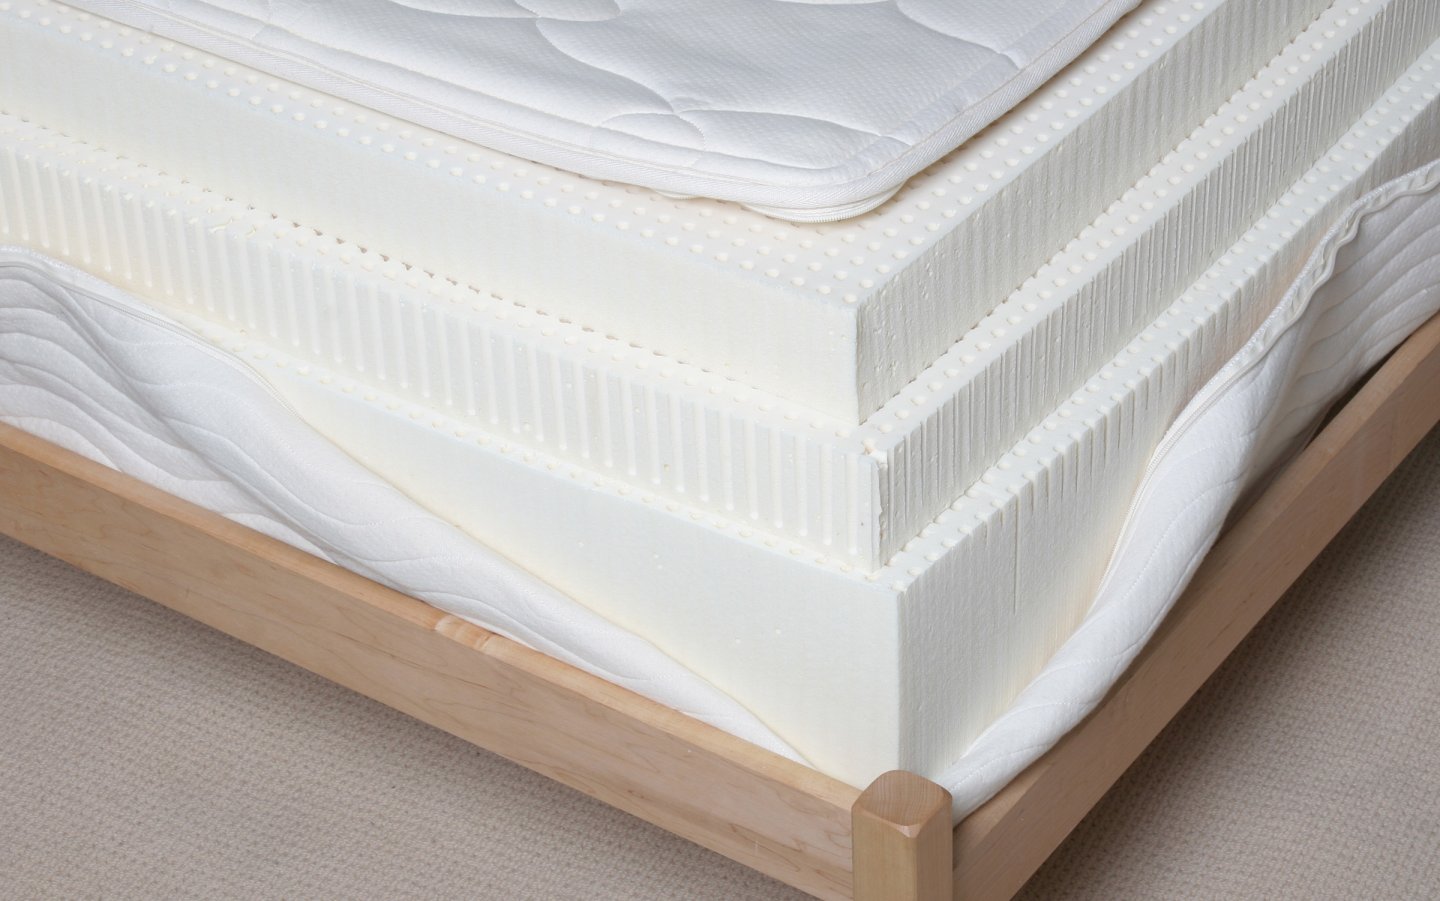 Detailed view of 12 inch latex mattress showing 3 layers of natural Talalay latex.